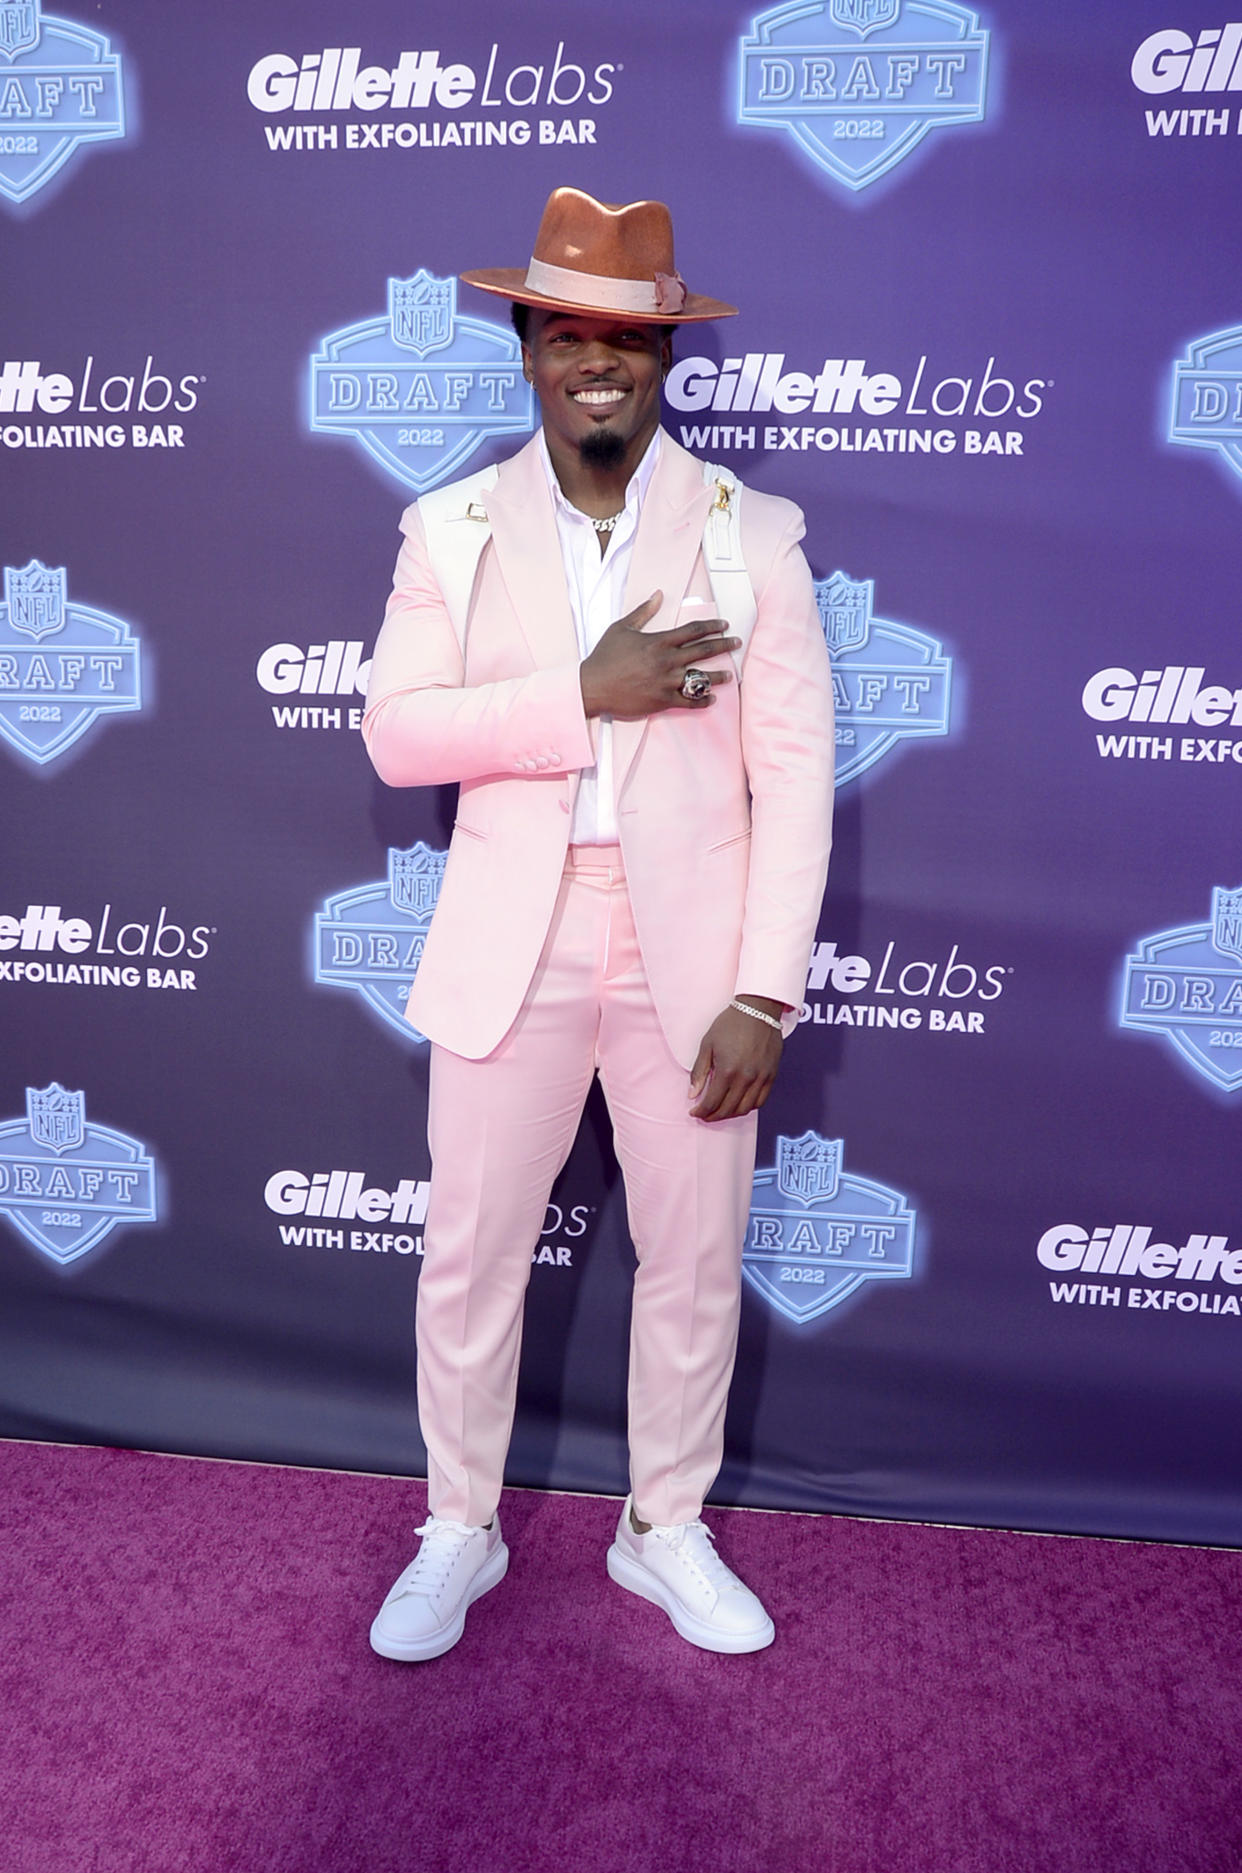 LAS VEGAS, NEVADA - APRIL 28: Nakobe Dean attends the 2022 NFL Draft on April 28, 2022 in Las Vegas, Nevada. (Photo by Mindy Small/Getty Images)